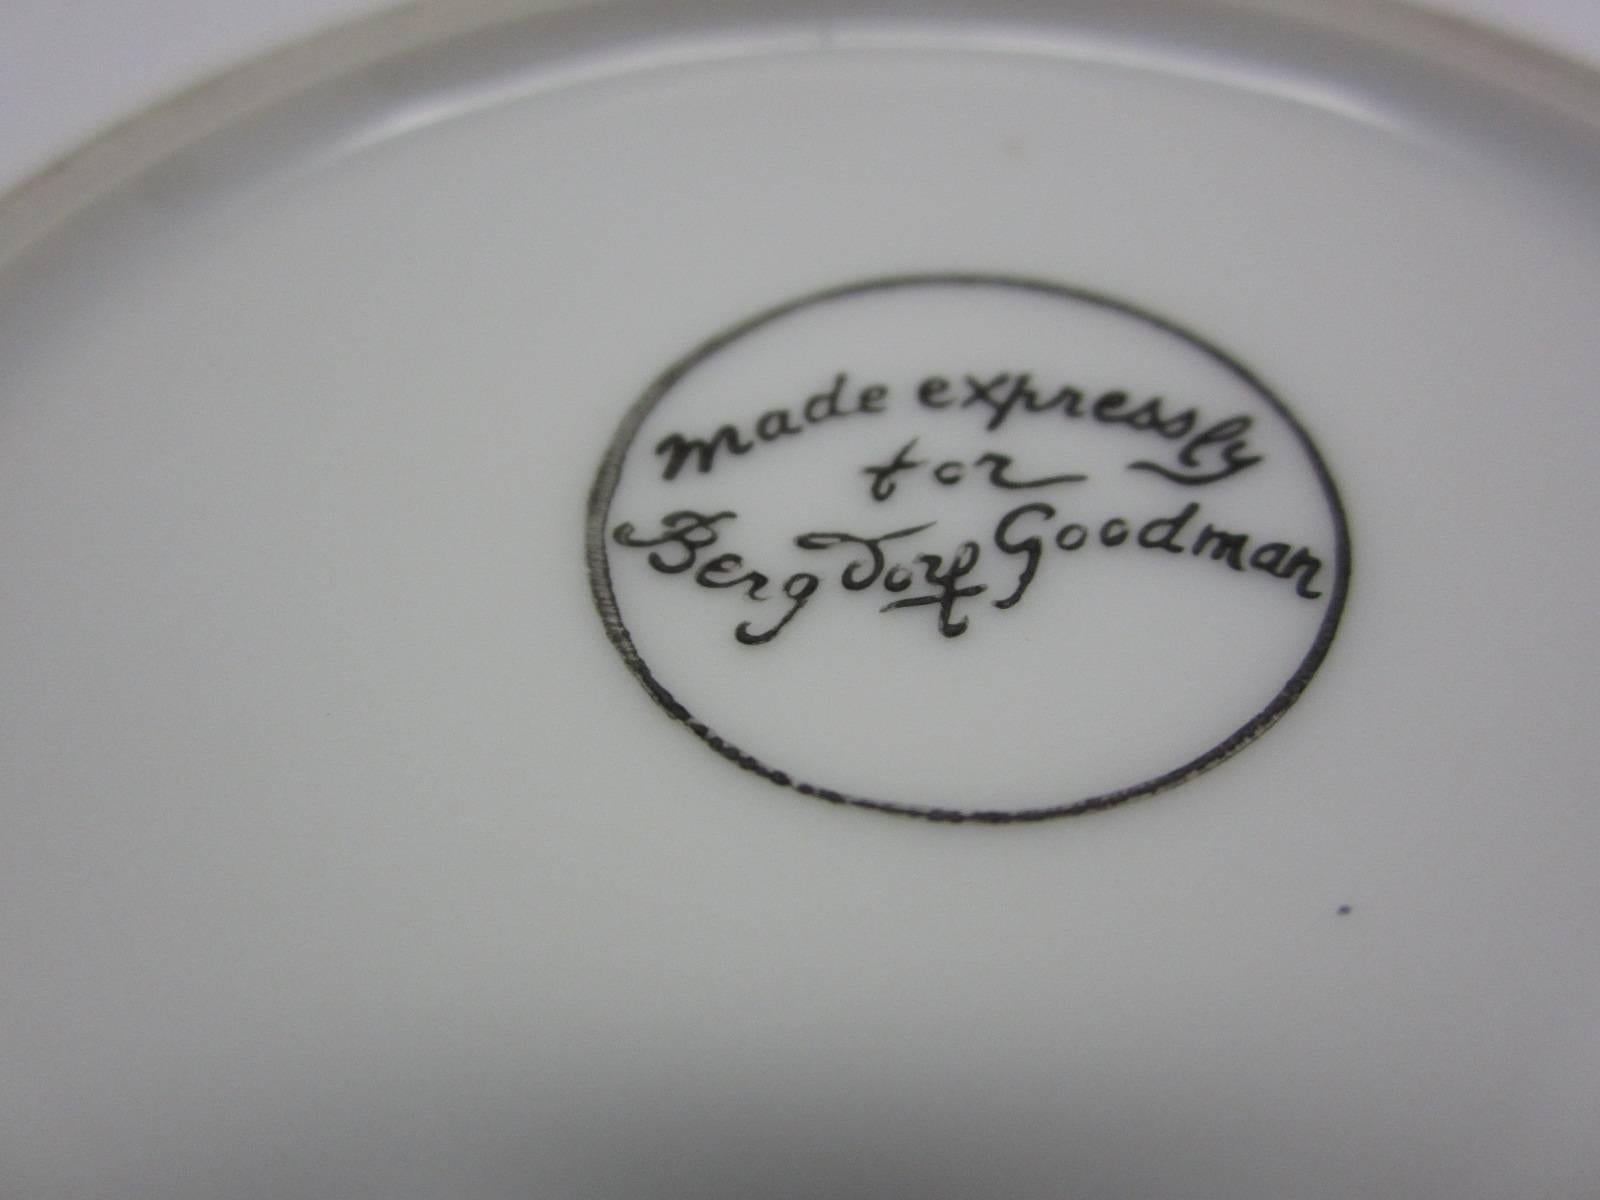 Mid-20th Century Fornasetti for Bergdorf Goodman Porcelain Trinket Dish with Clock Motif 